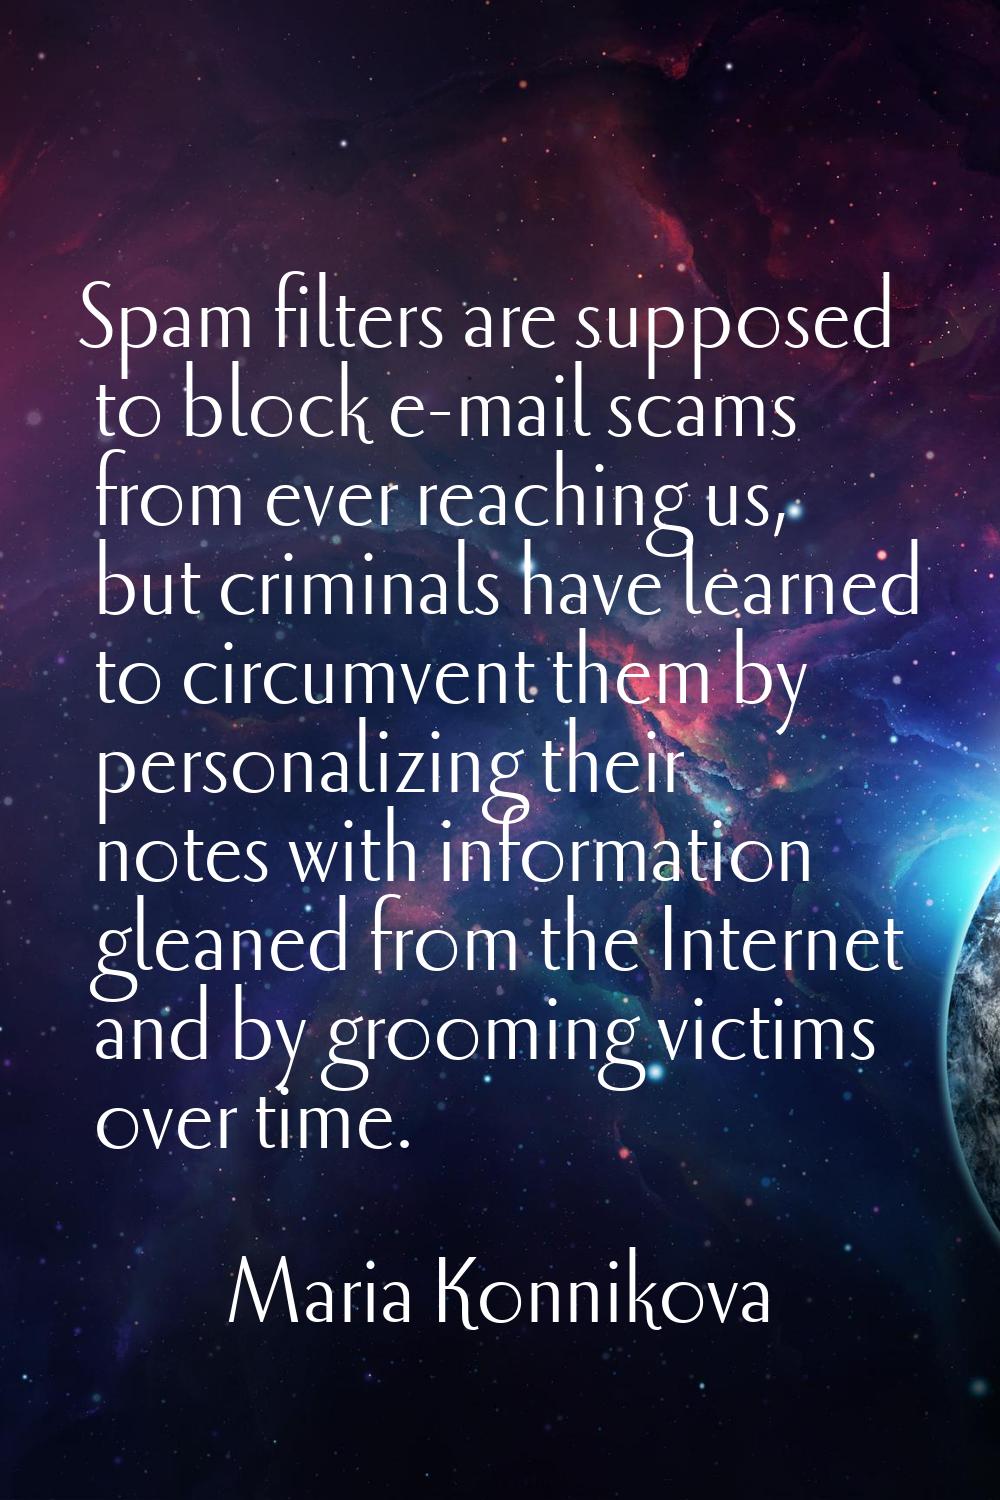 Spam filters are supposed to block e-mail scams from ever reaching us, but criminals have learned t